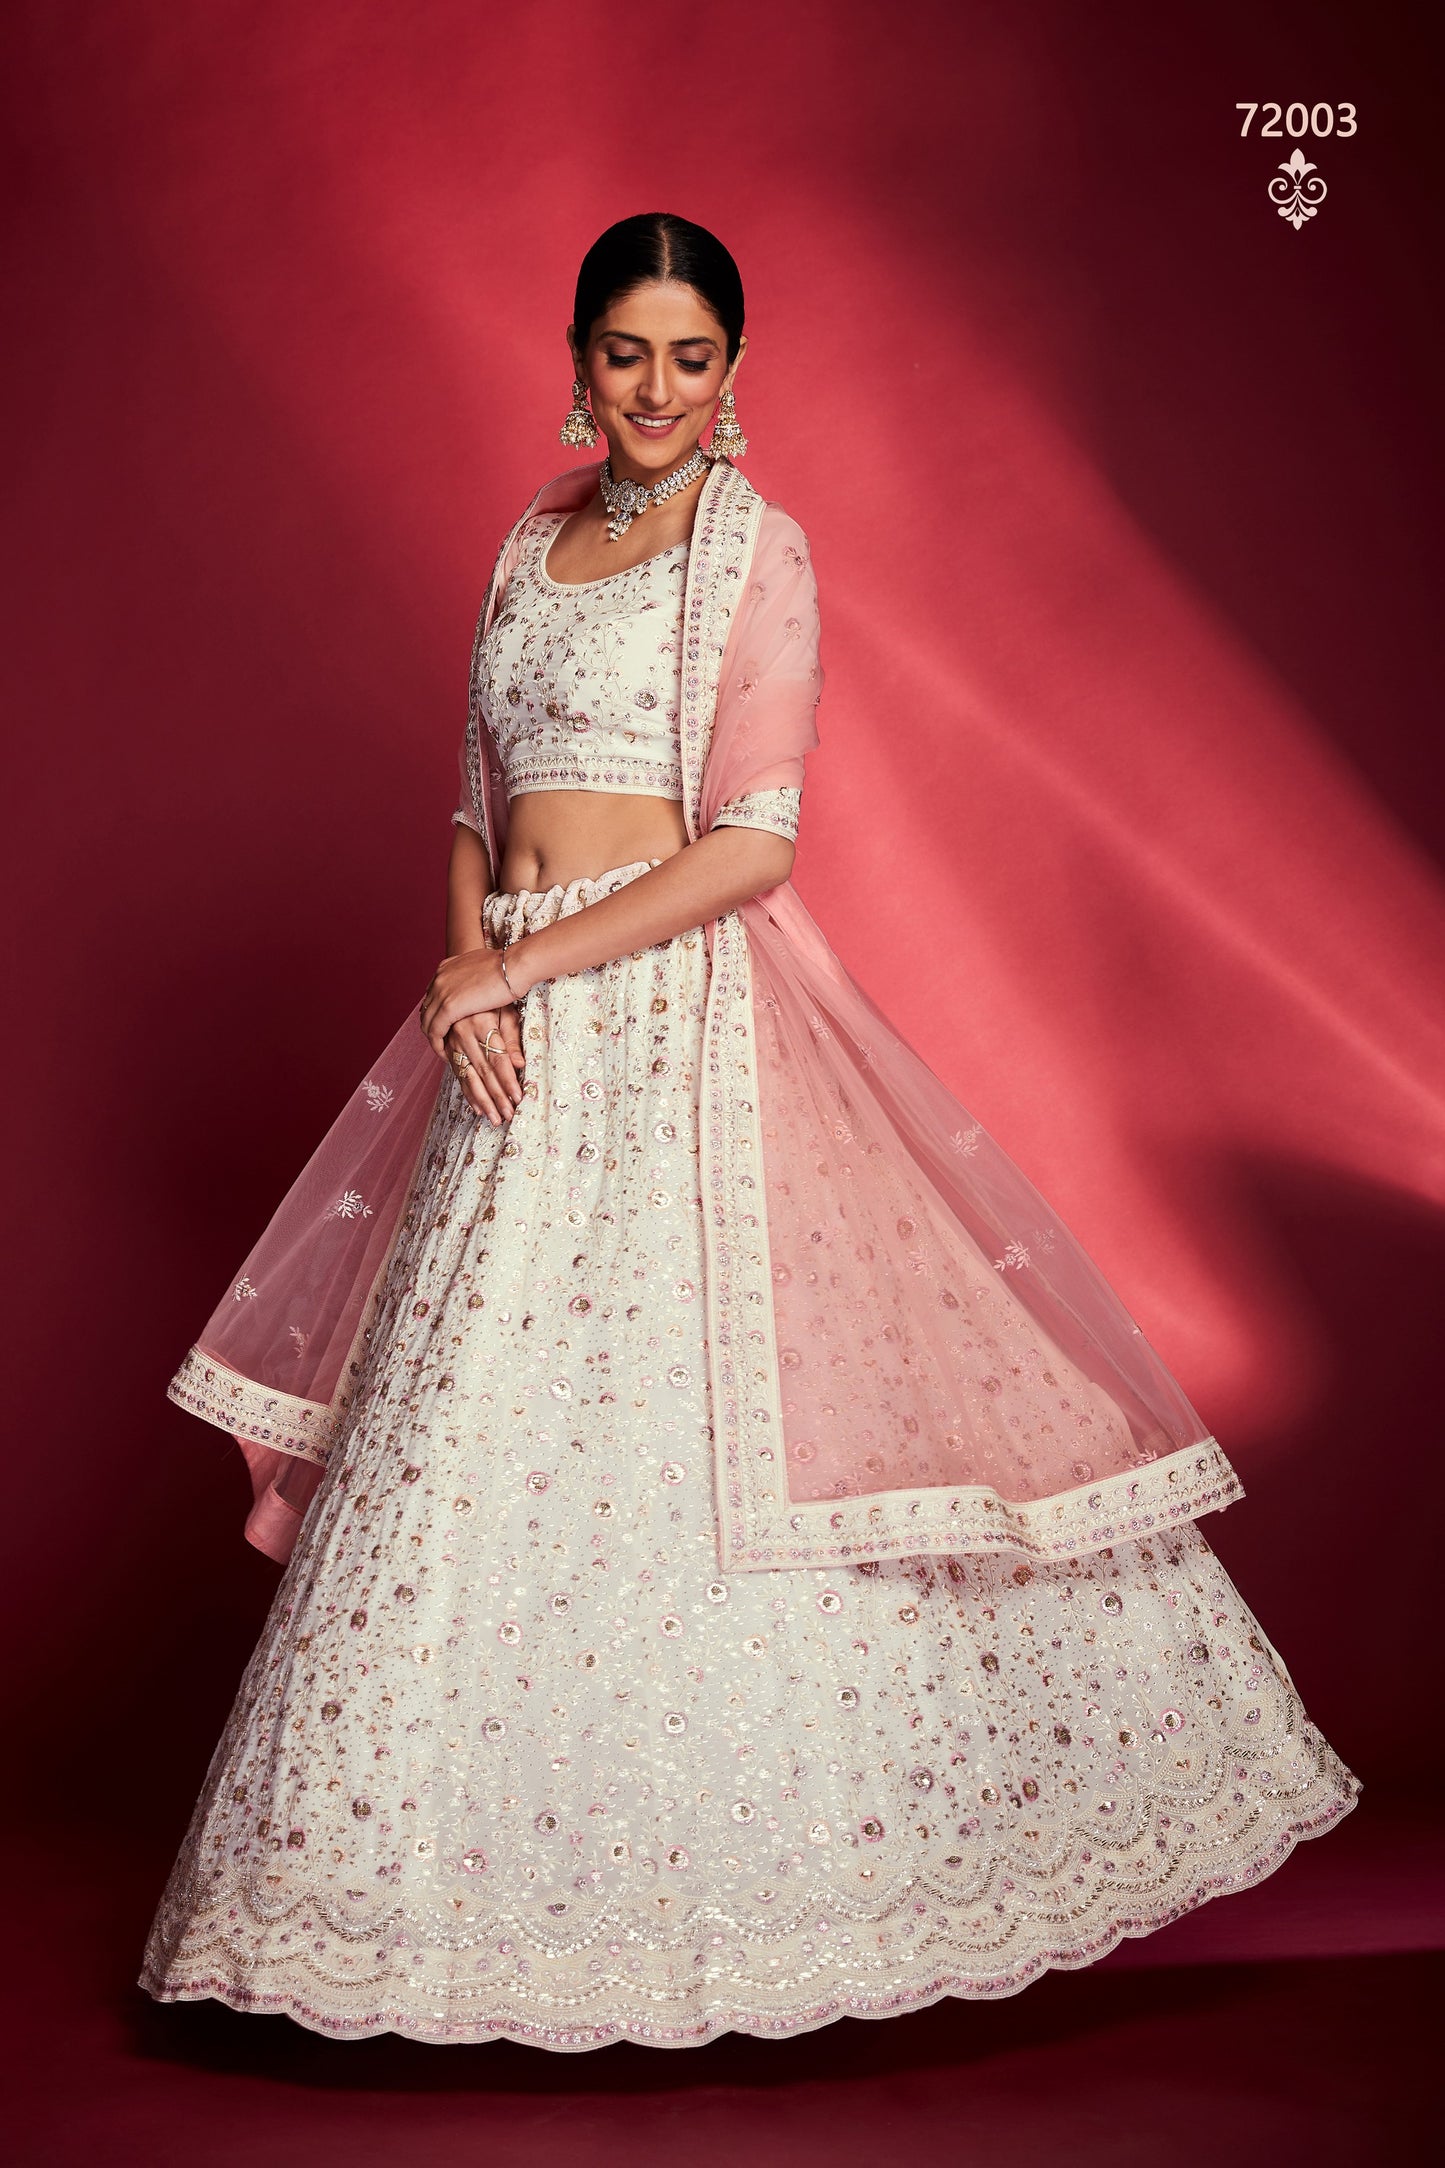 White Pakistani Georgette Lehenga Choli For Indian Festivals & Weddings - Sequence Embroidery Work, Thread Embroidery Work, Zari Work, Swarovski Work